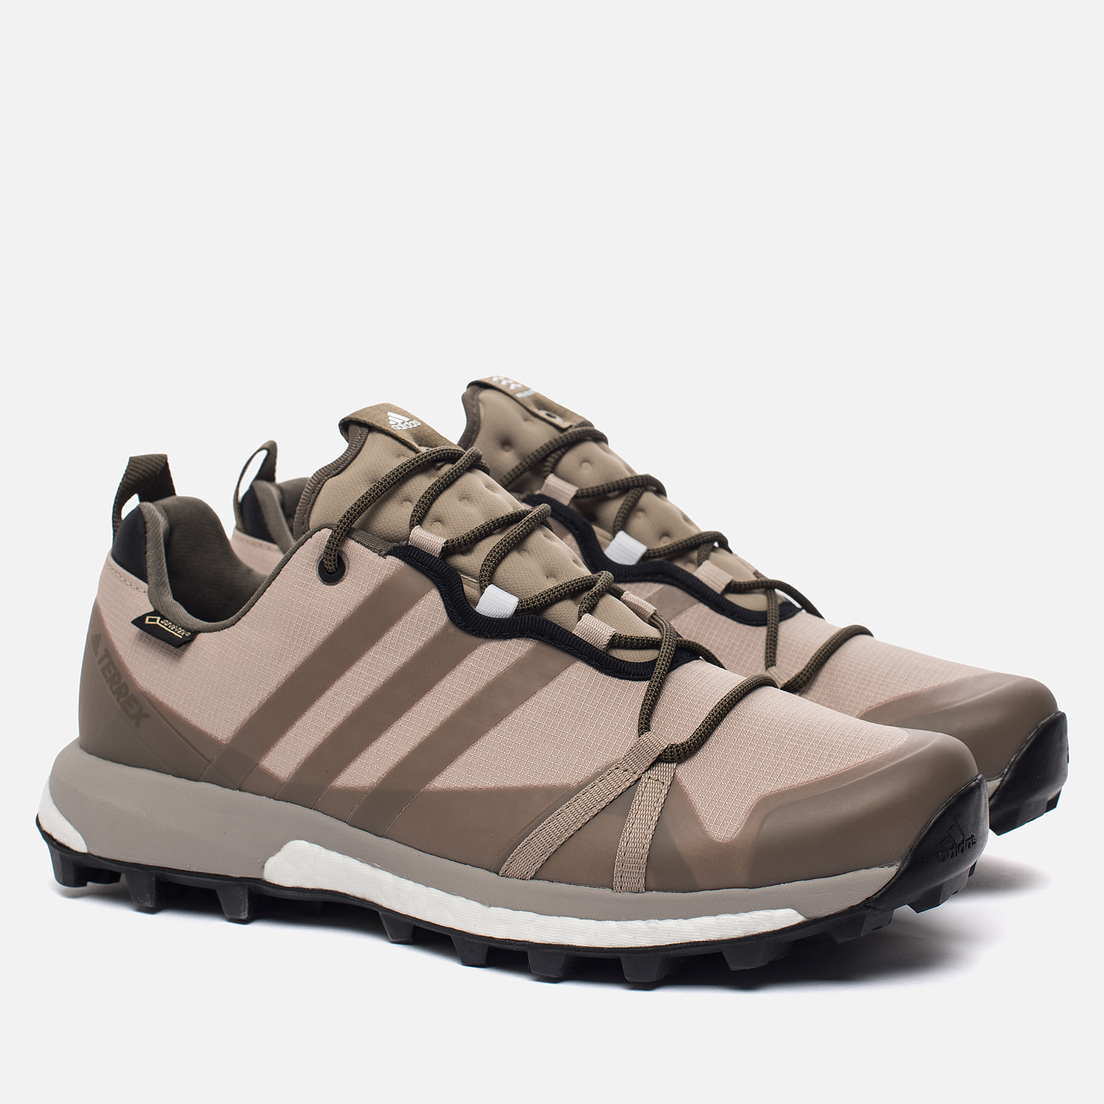 adidas Consortium Мужские кроссовки x Norse Projects Terrex Agravic Layers Pack